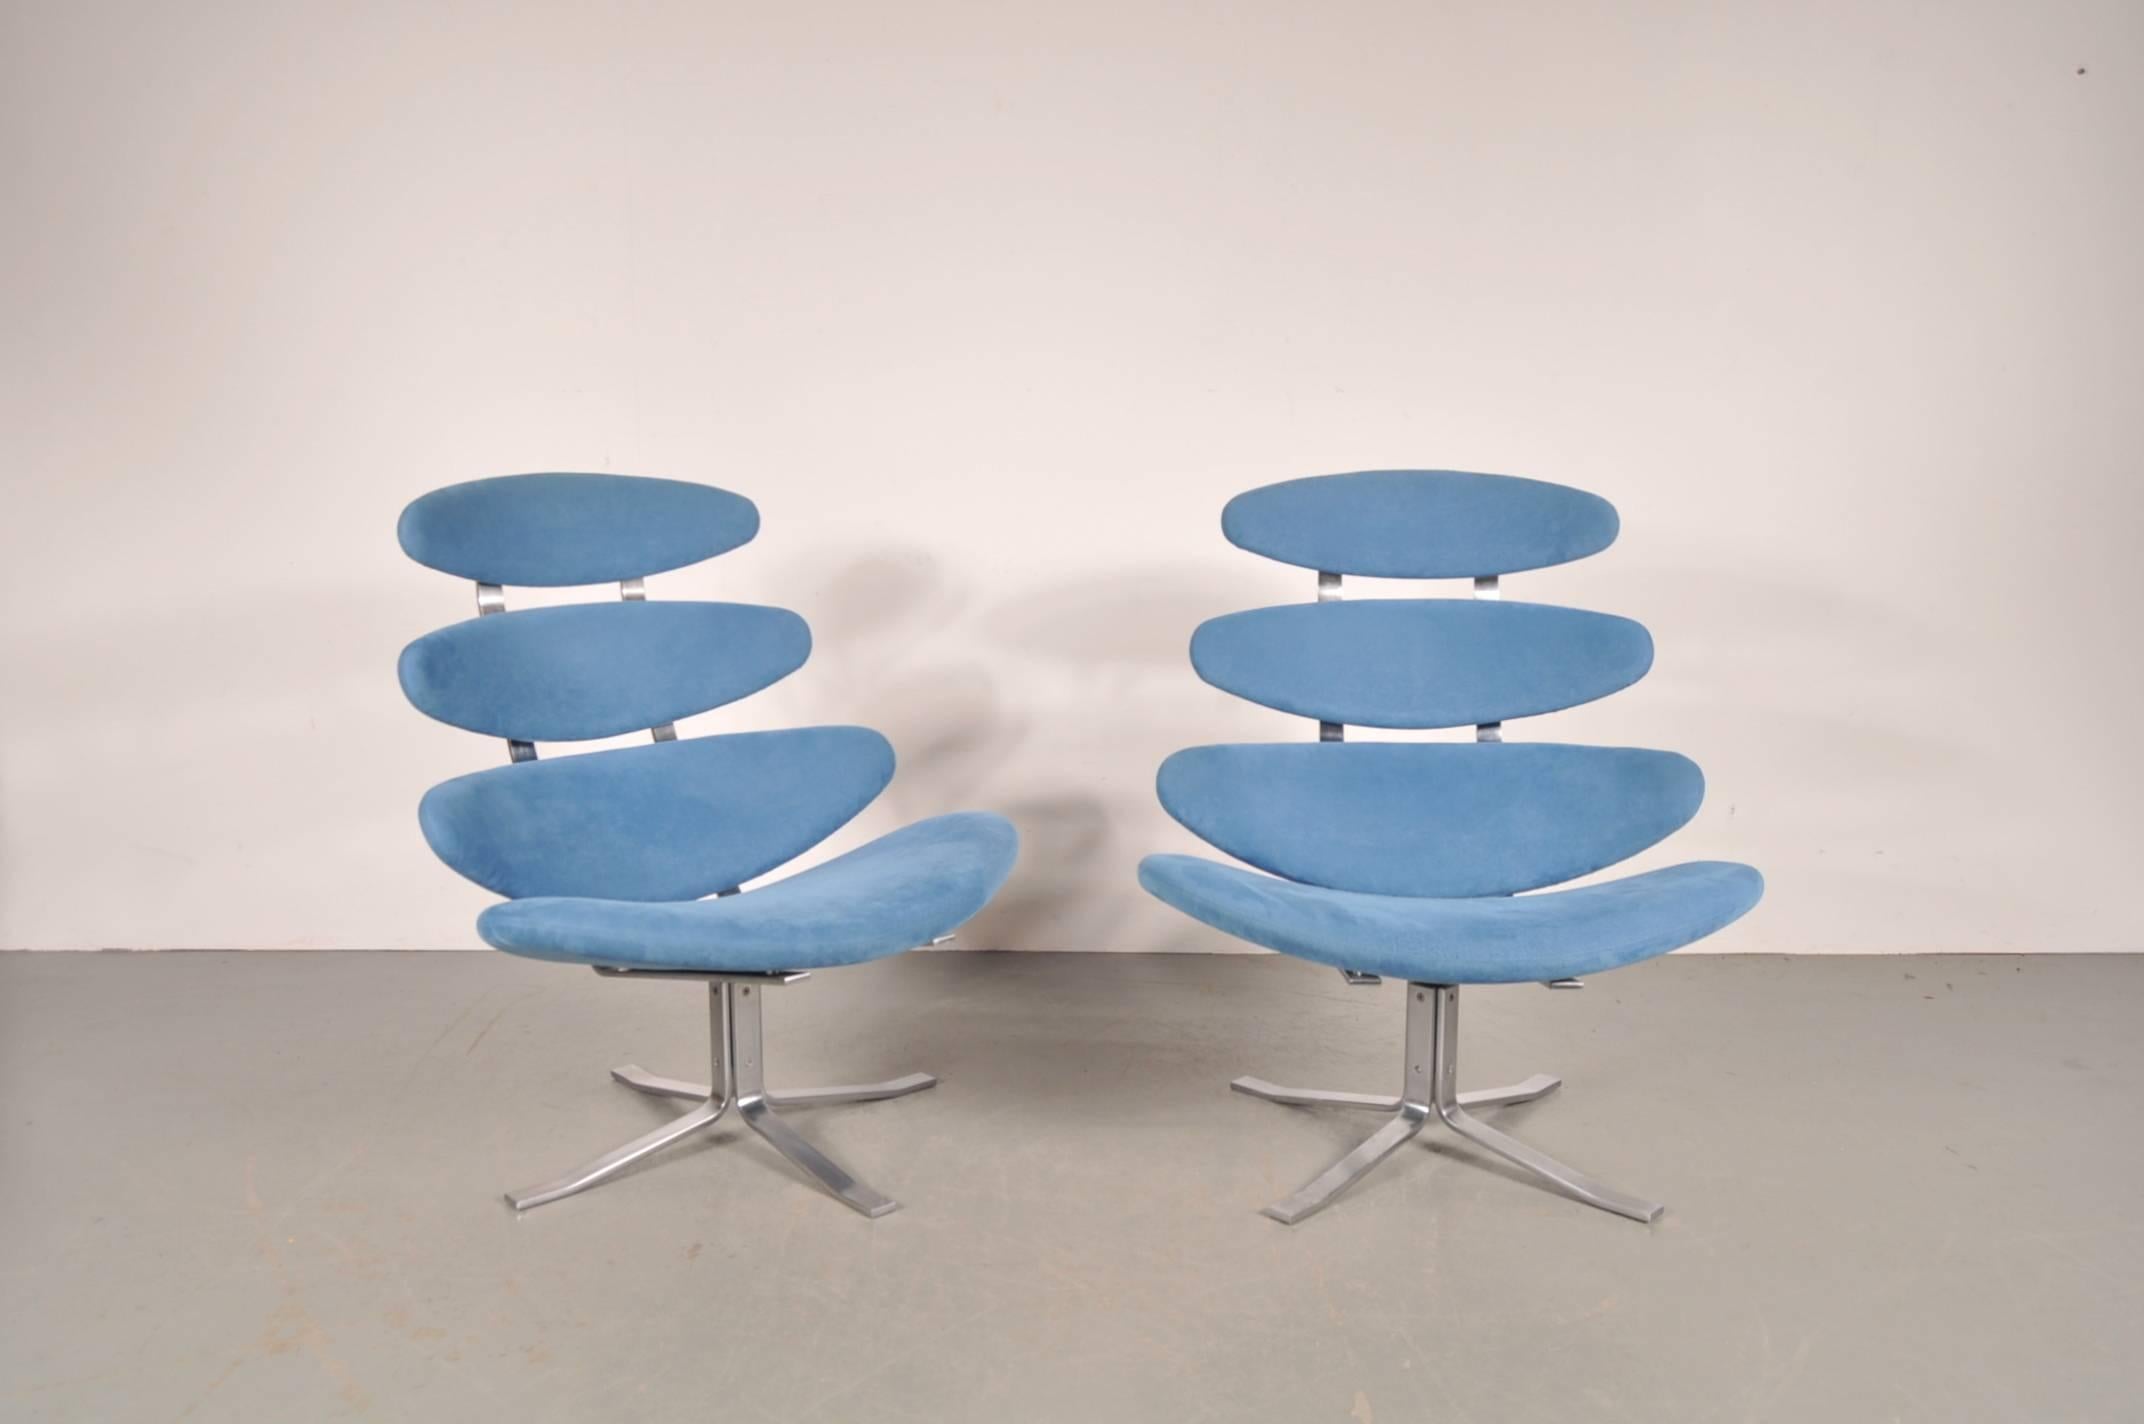 Stunning set of two Corona chairs designed by Poul Volther, manufactured by Erik Jorgensen in Denmark in 1964.

These iconic chairs are made of beautiful quality chrome metal and are newly upholstered in wonderful blue suede. There elliptical